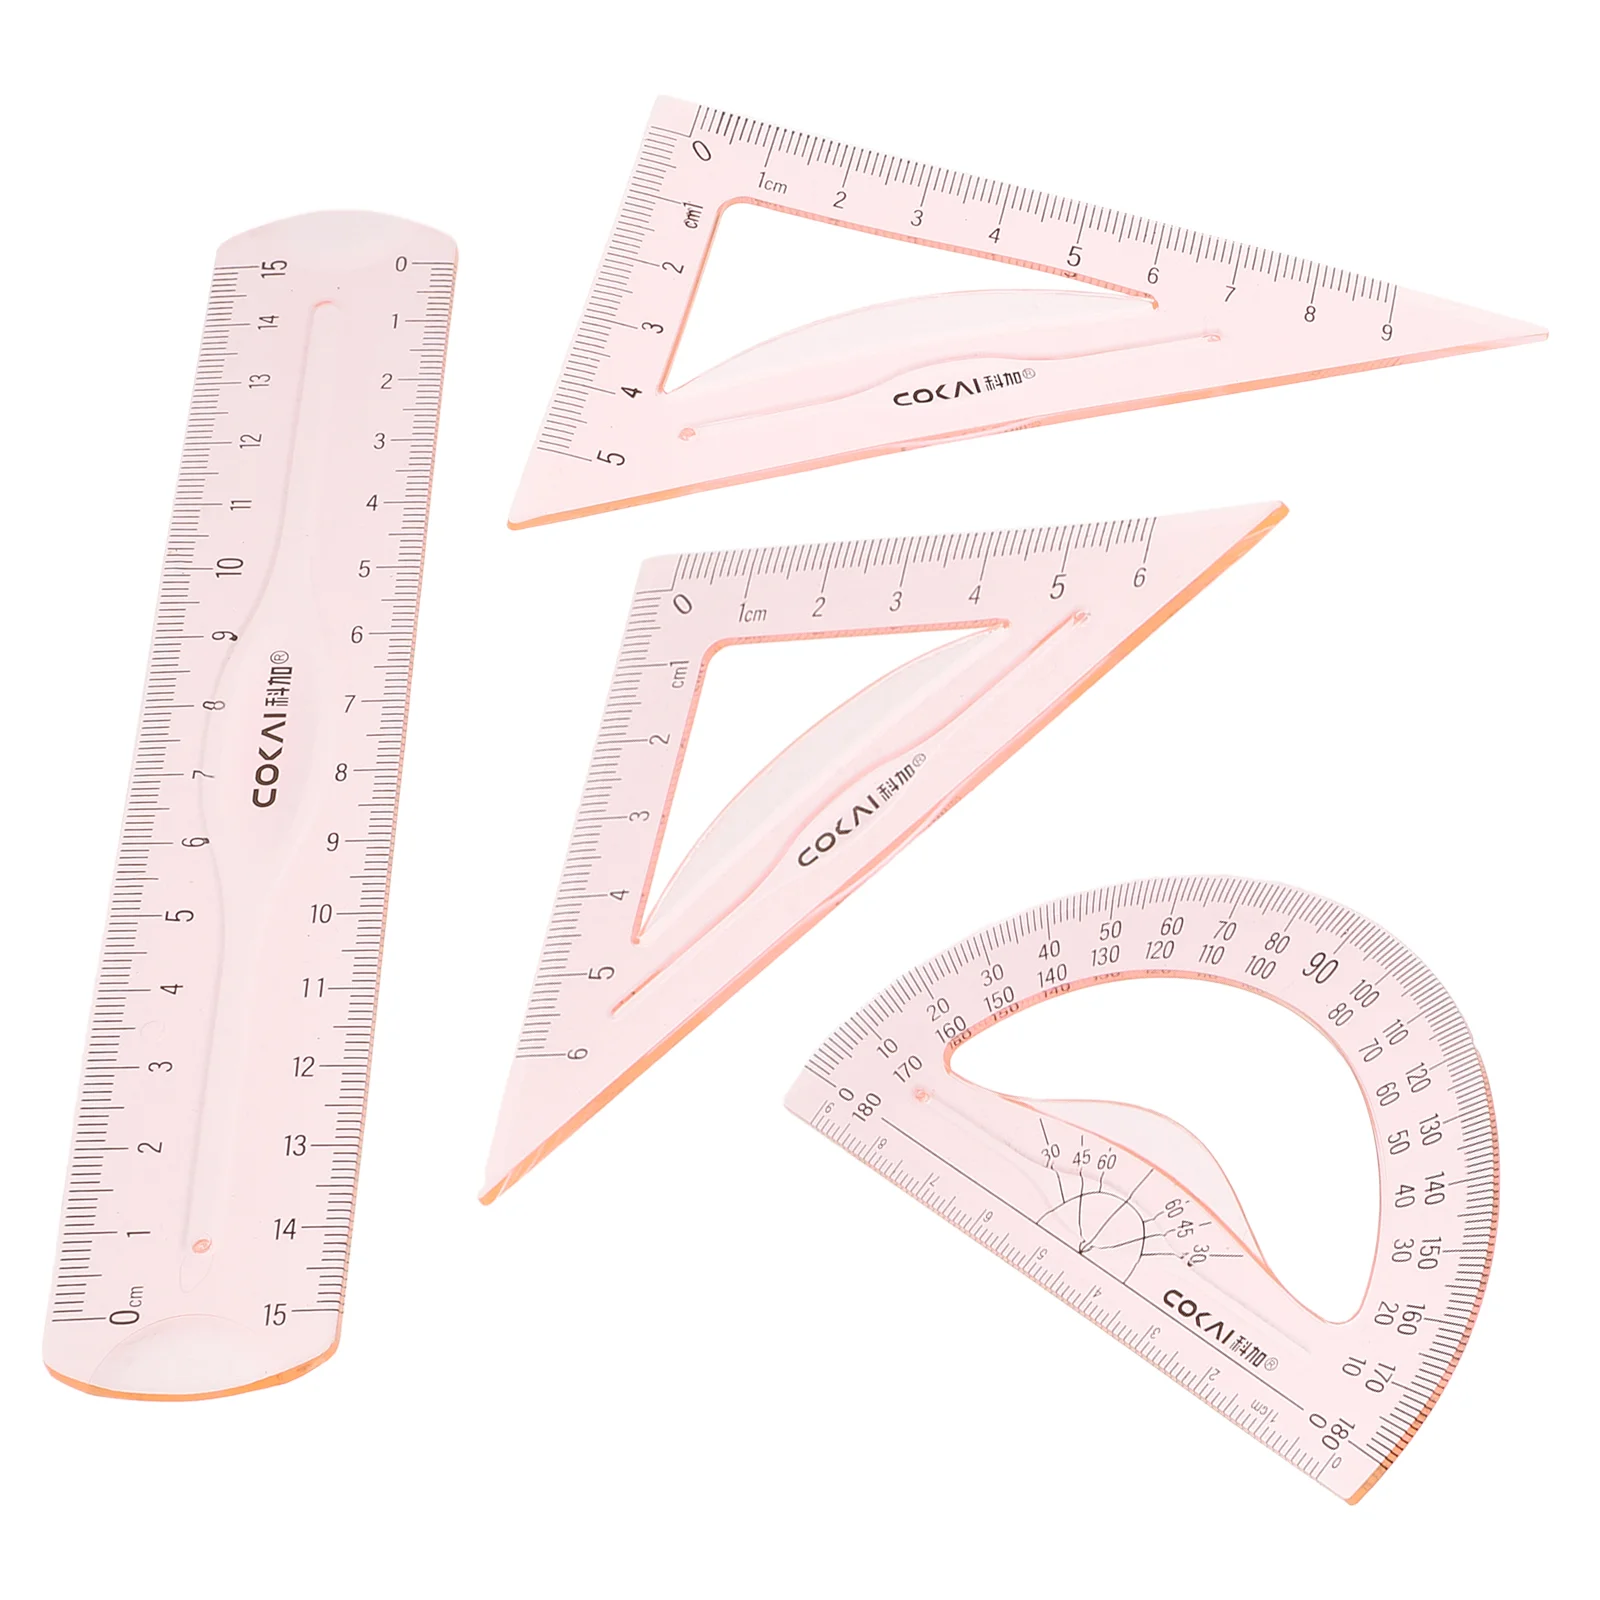 

4pcs/Set Plastic Straight Protractor Geometry Architectural Scale Ruler Drafting Ruler Precise Measuring Ruler School